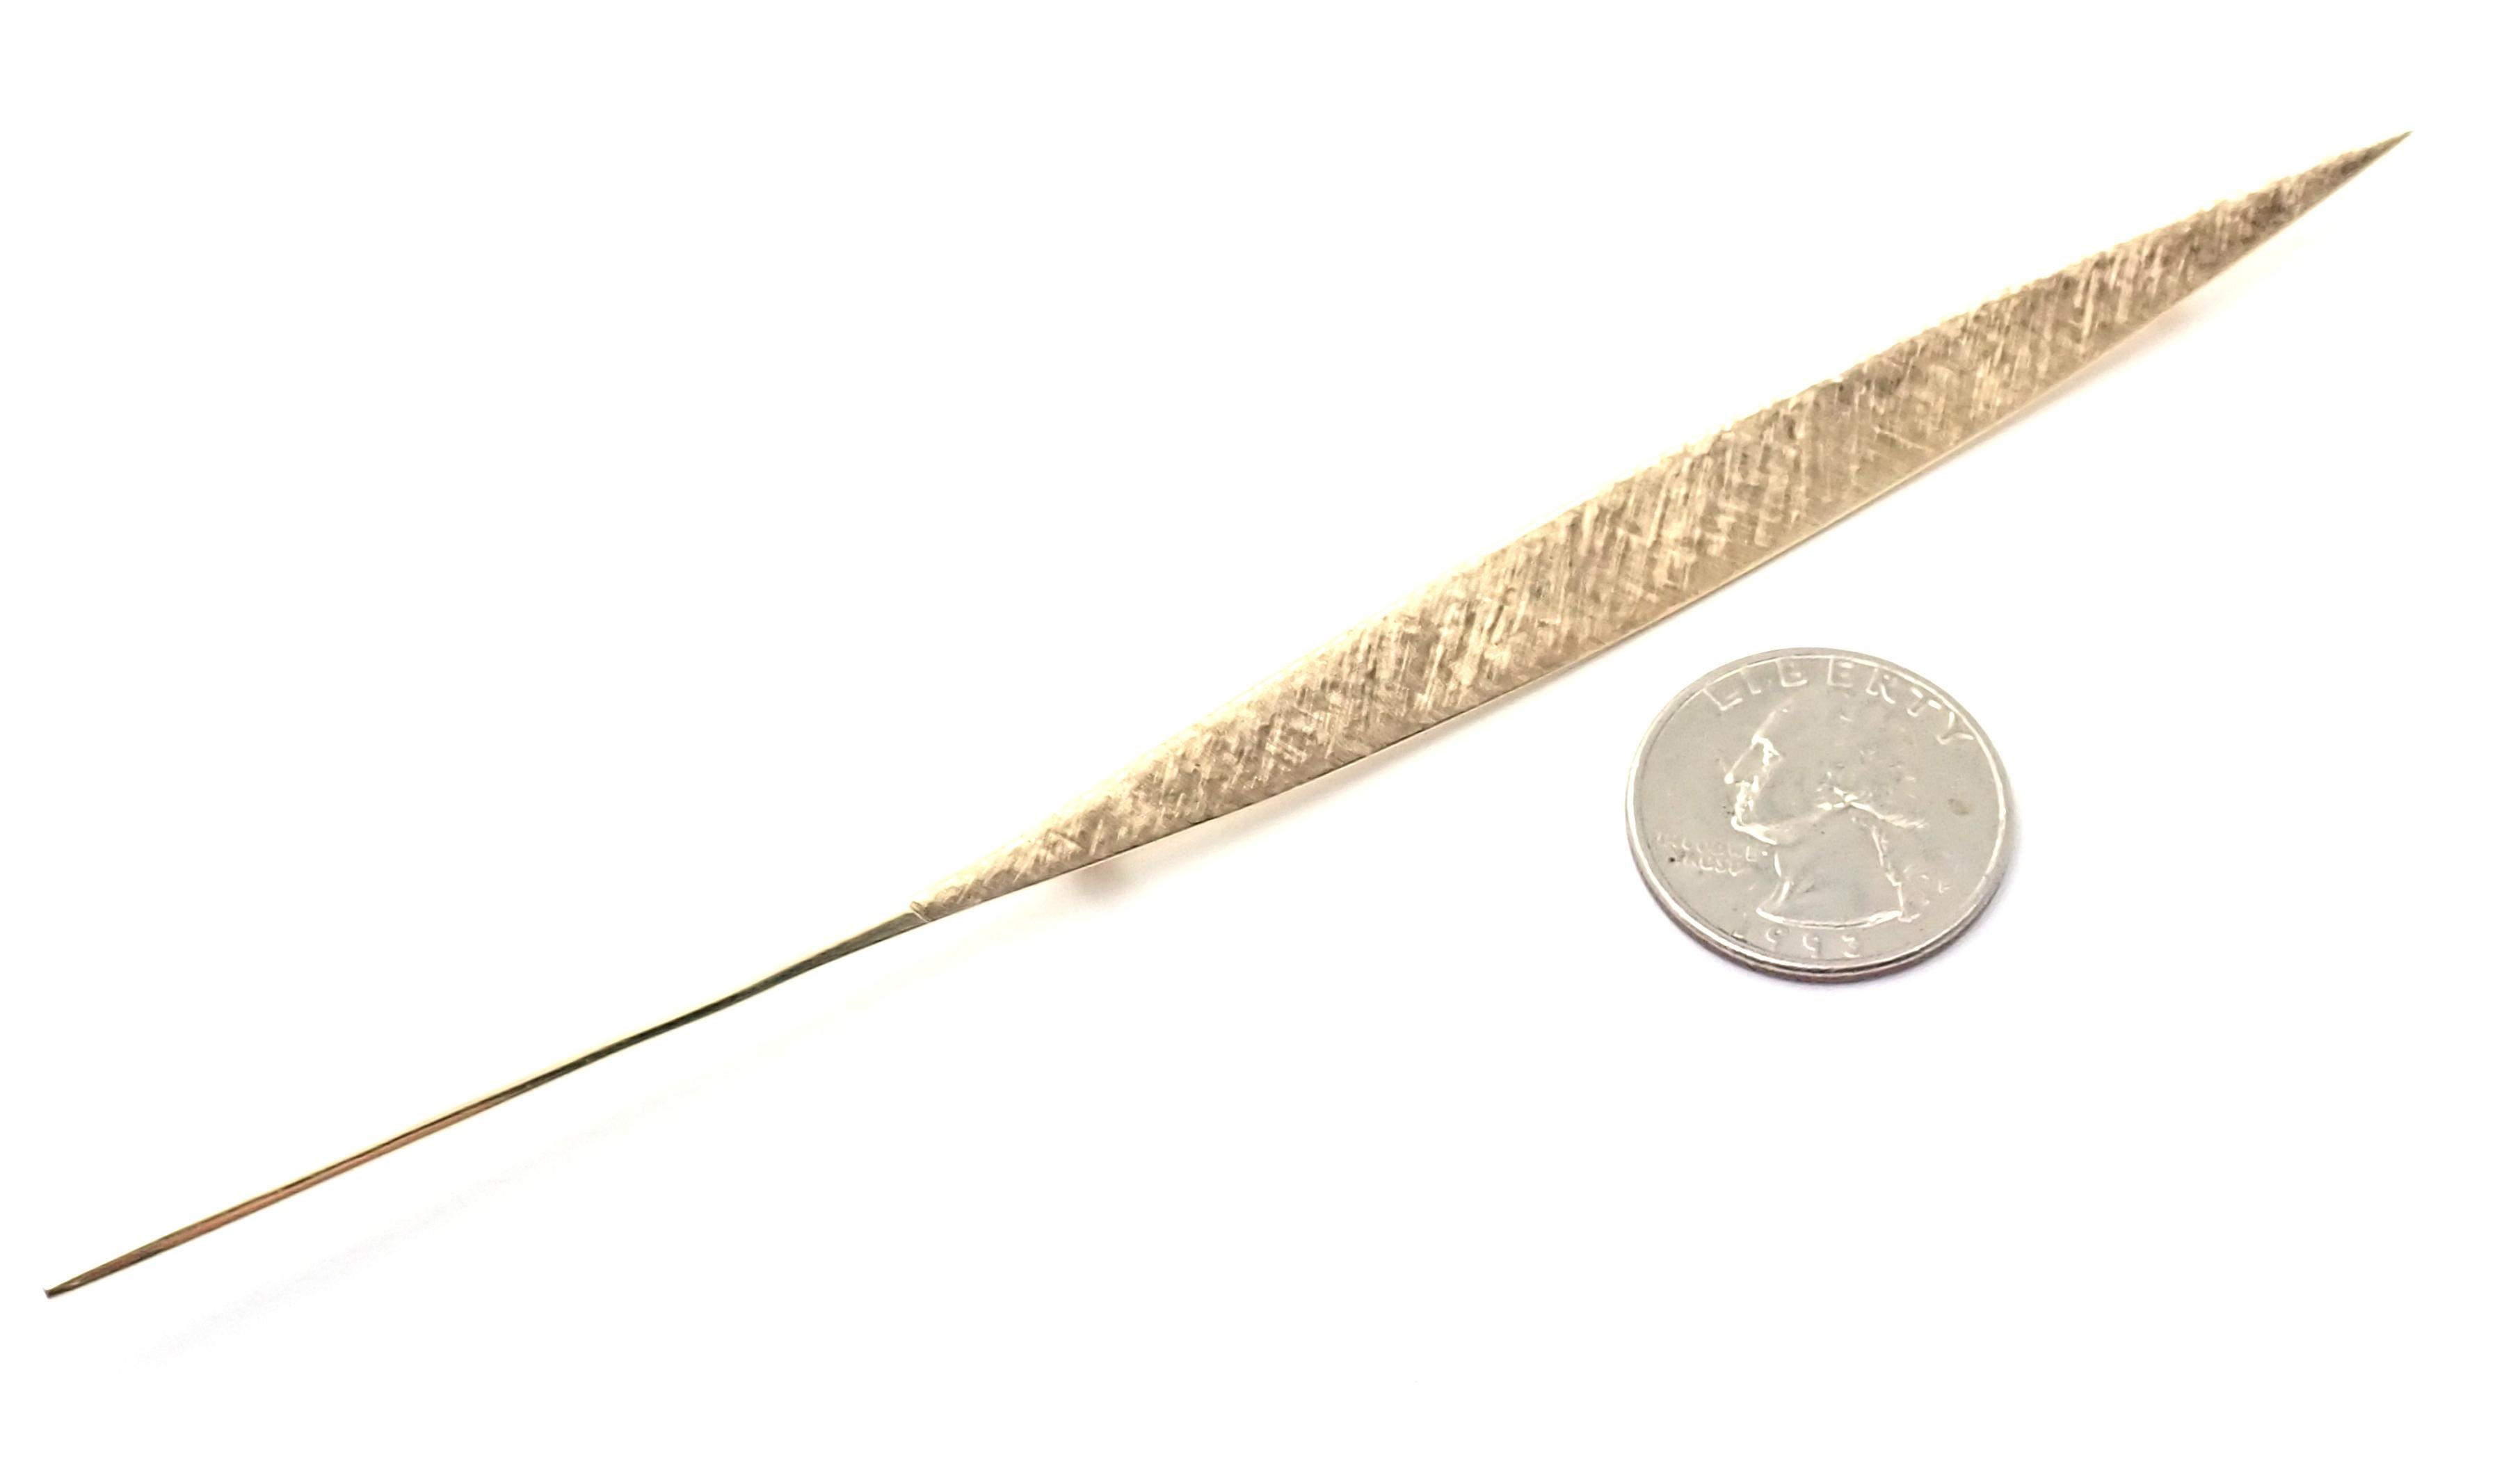 18k Yellow Gold Vintage Long Quill Brooch Pin by Dinh Van for Cartier. 
Details: 
Length: 6.5